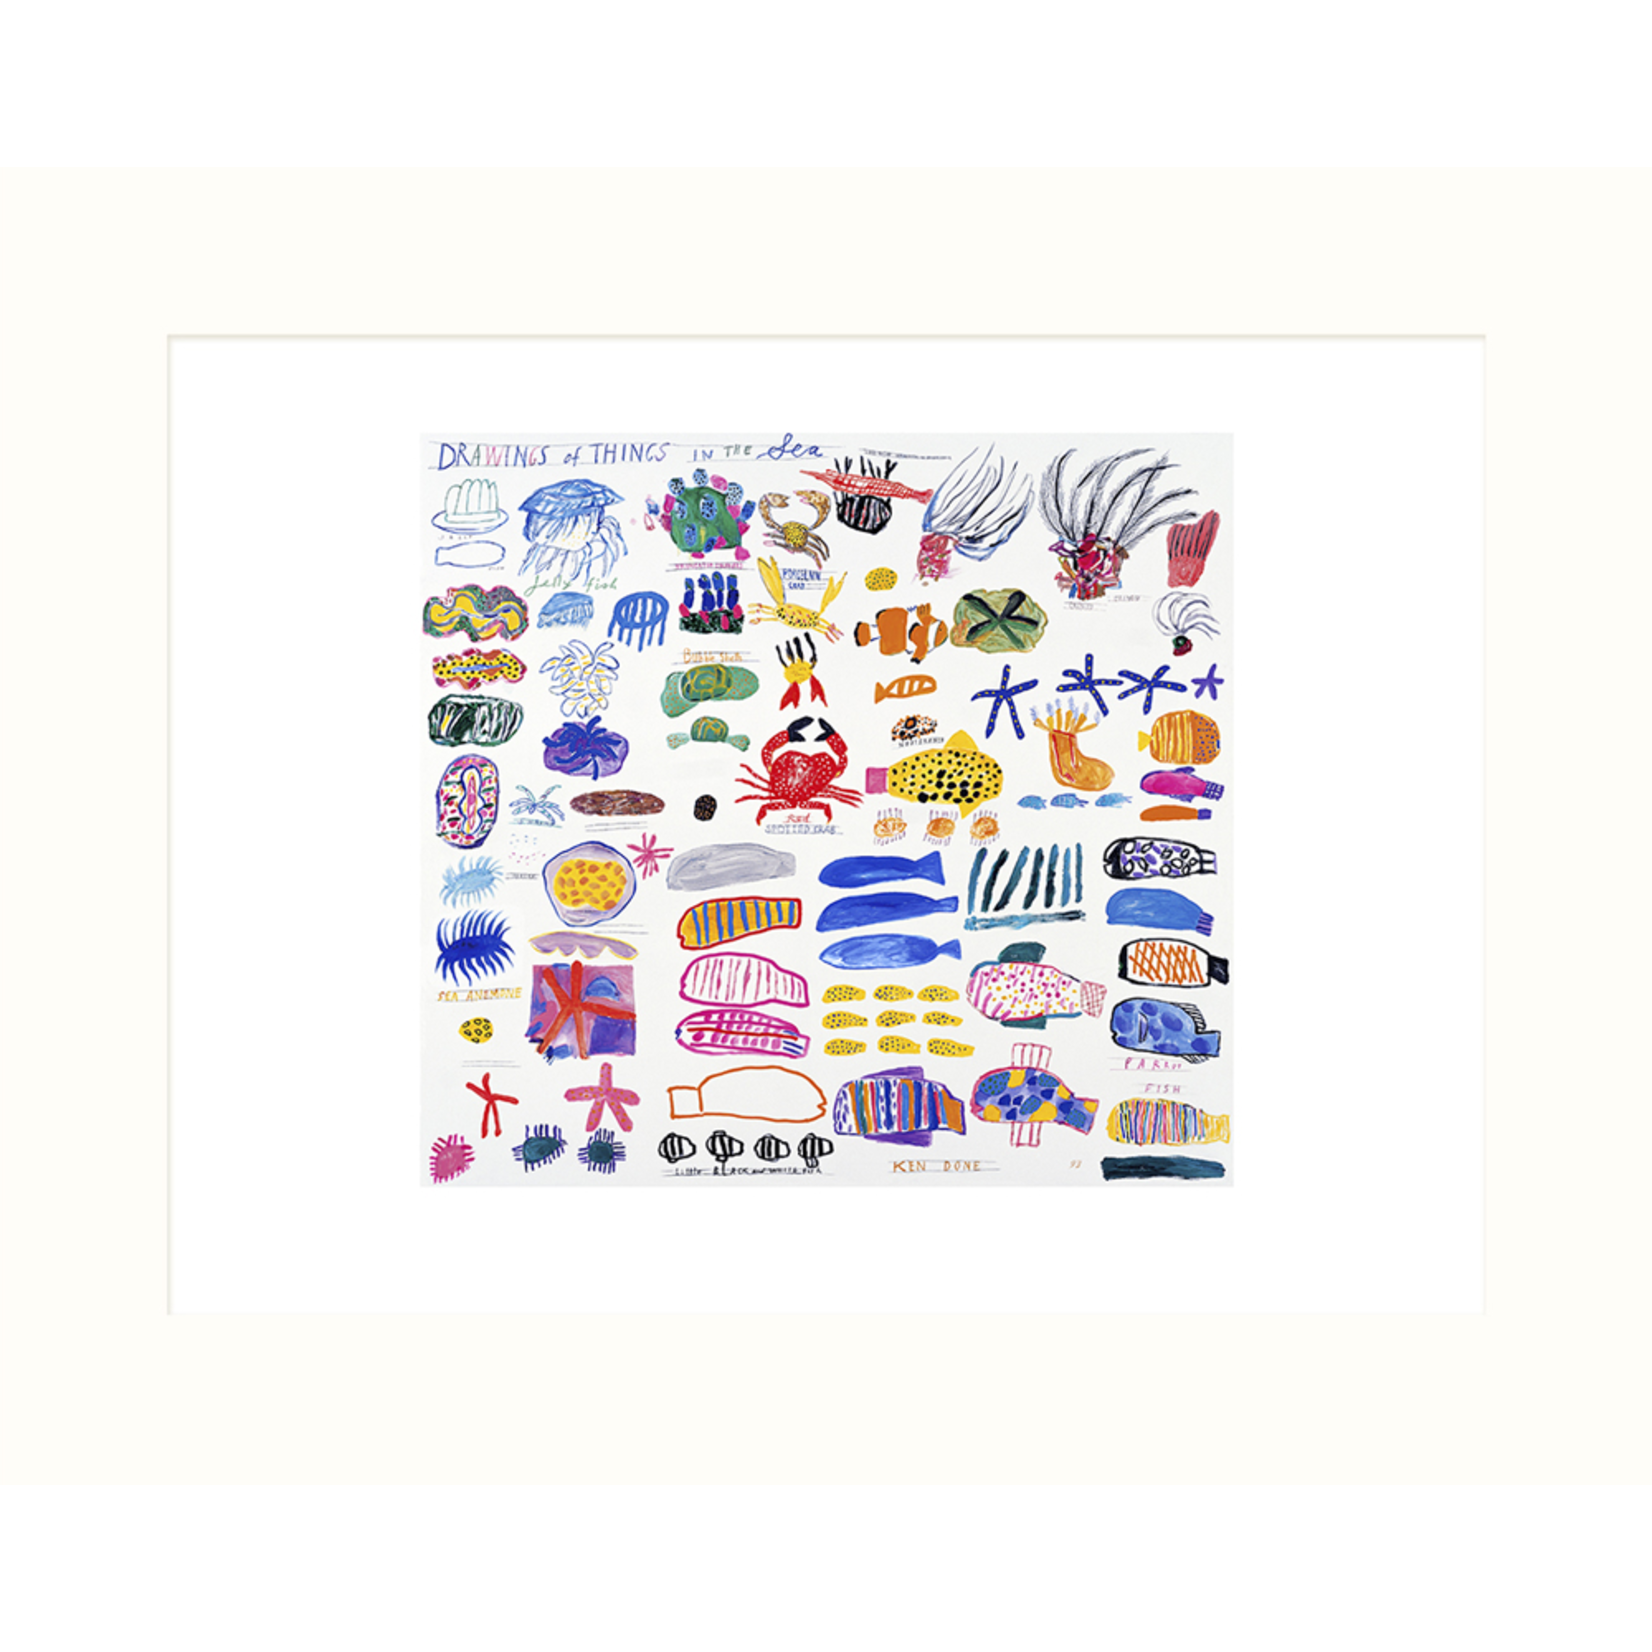 Limited Edition Prints Drawings of things in the sea, 1993